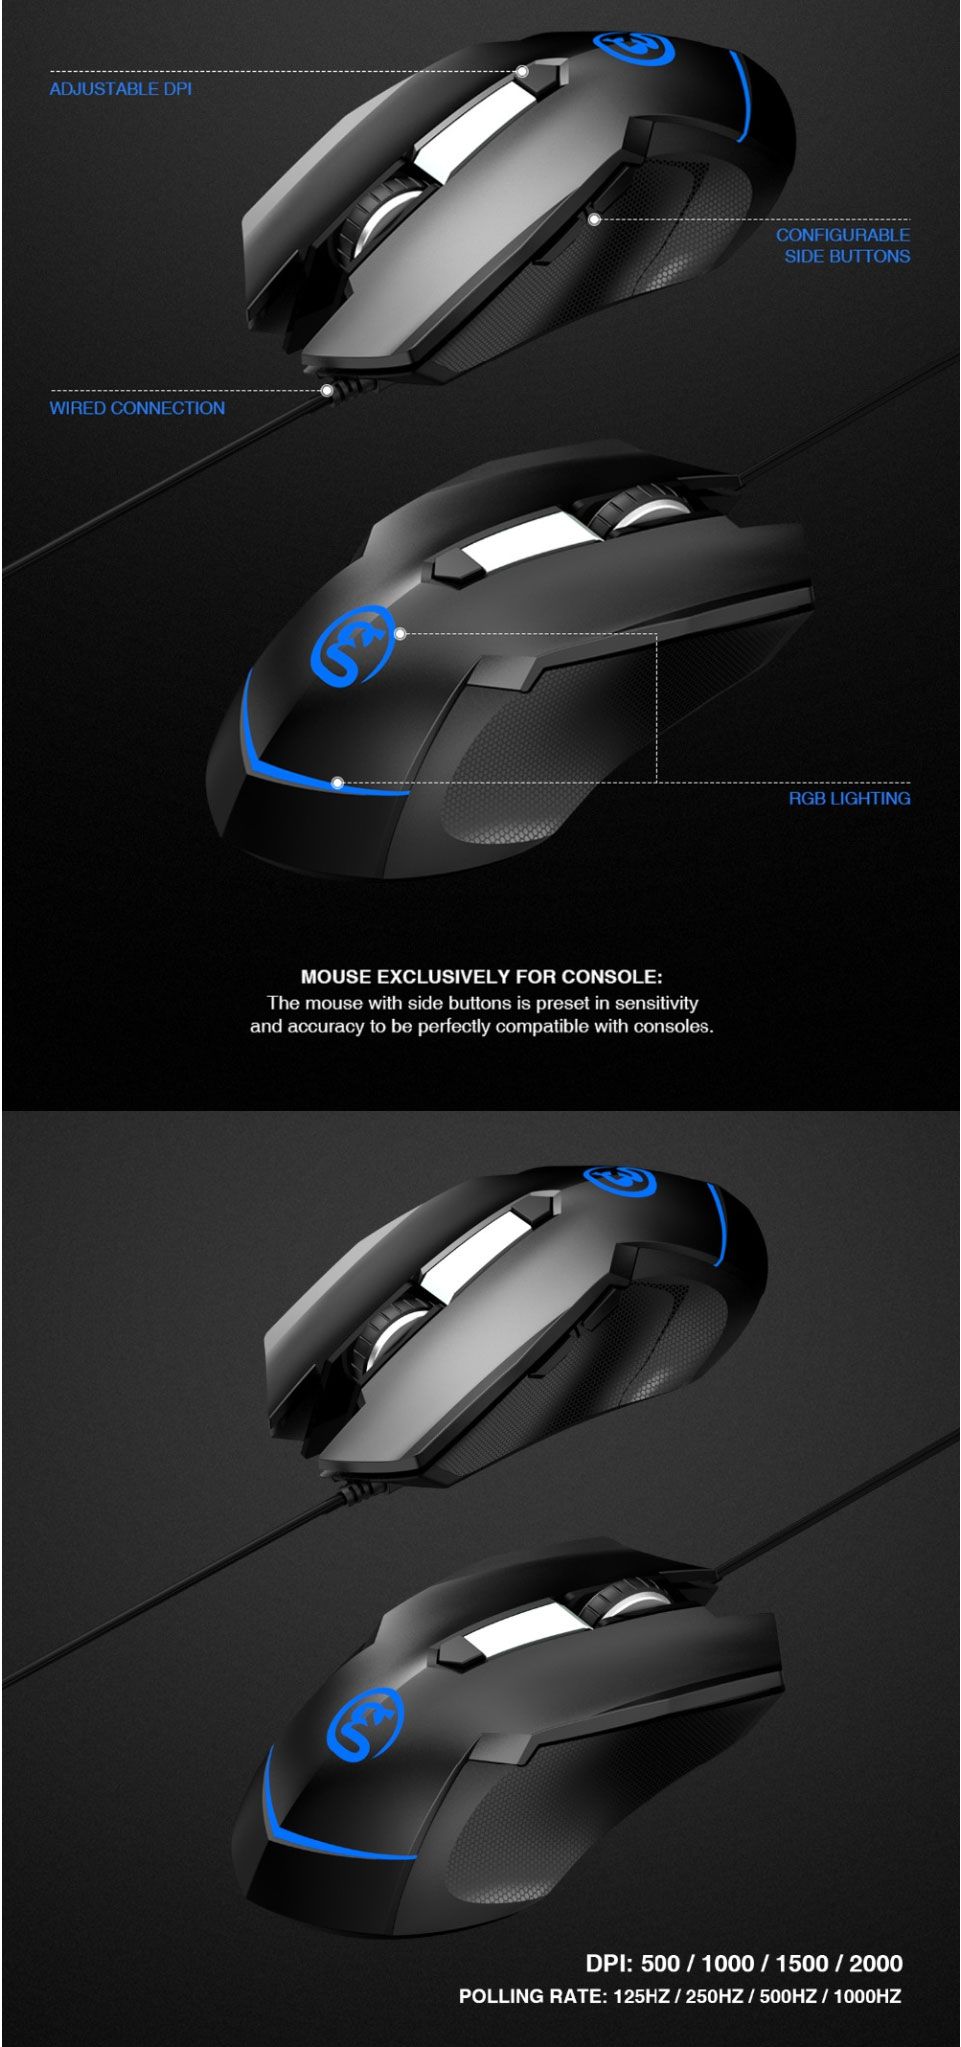 Gamesir-VX-AimSwitch-Keyboard-Mouse-Gamepad-Converter-Single-Hand-Mechanical-Keyboard-For-PS4PS3Xbox-1412000